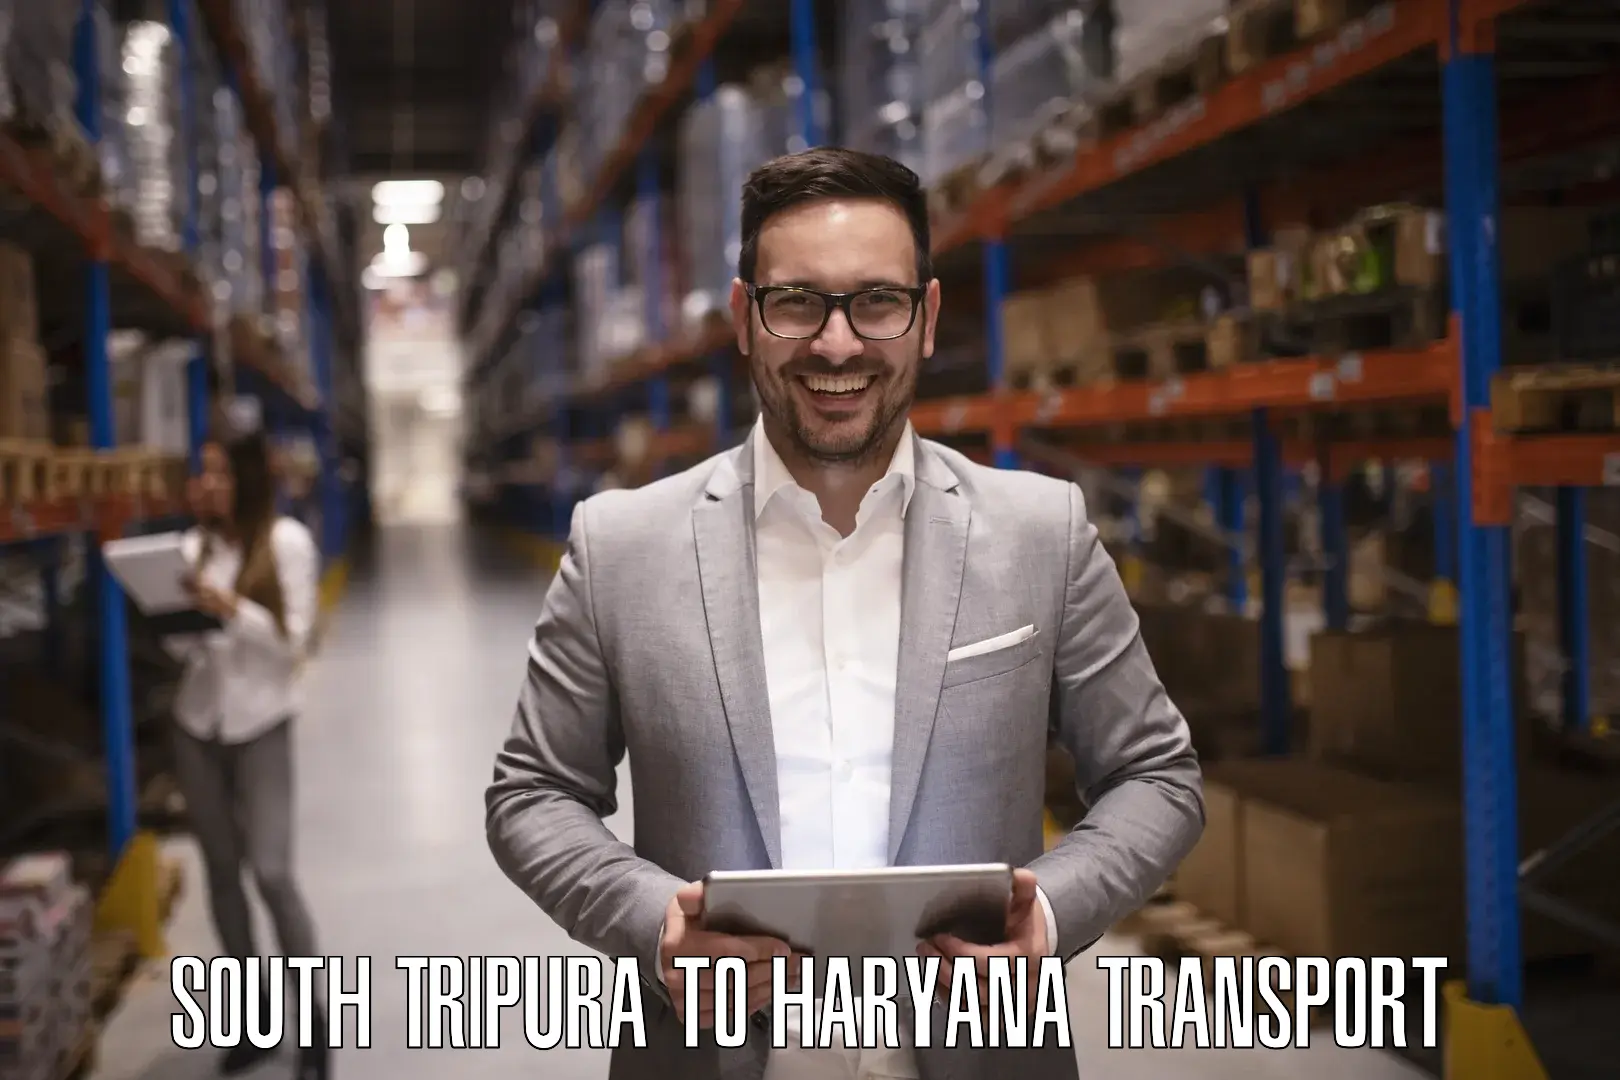 Daily parcel service transport South Tripura to Haryana